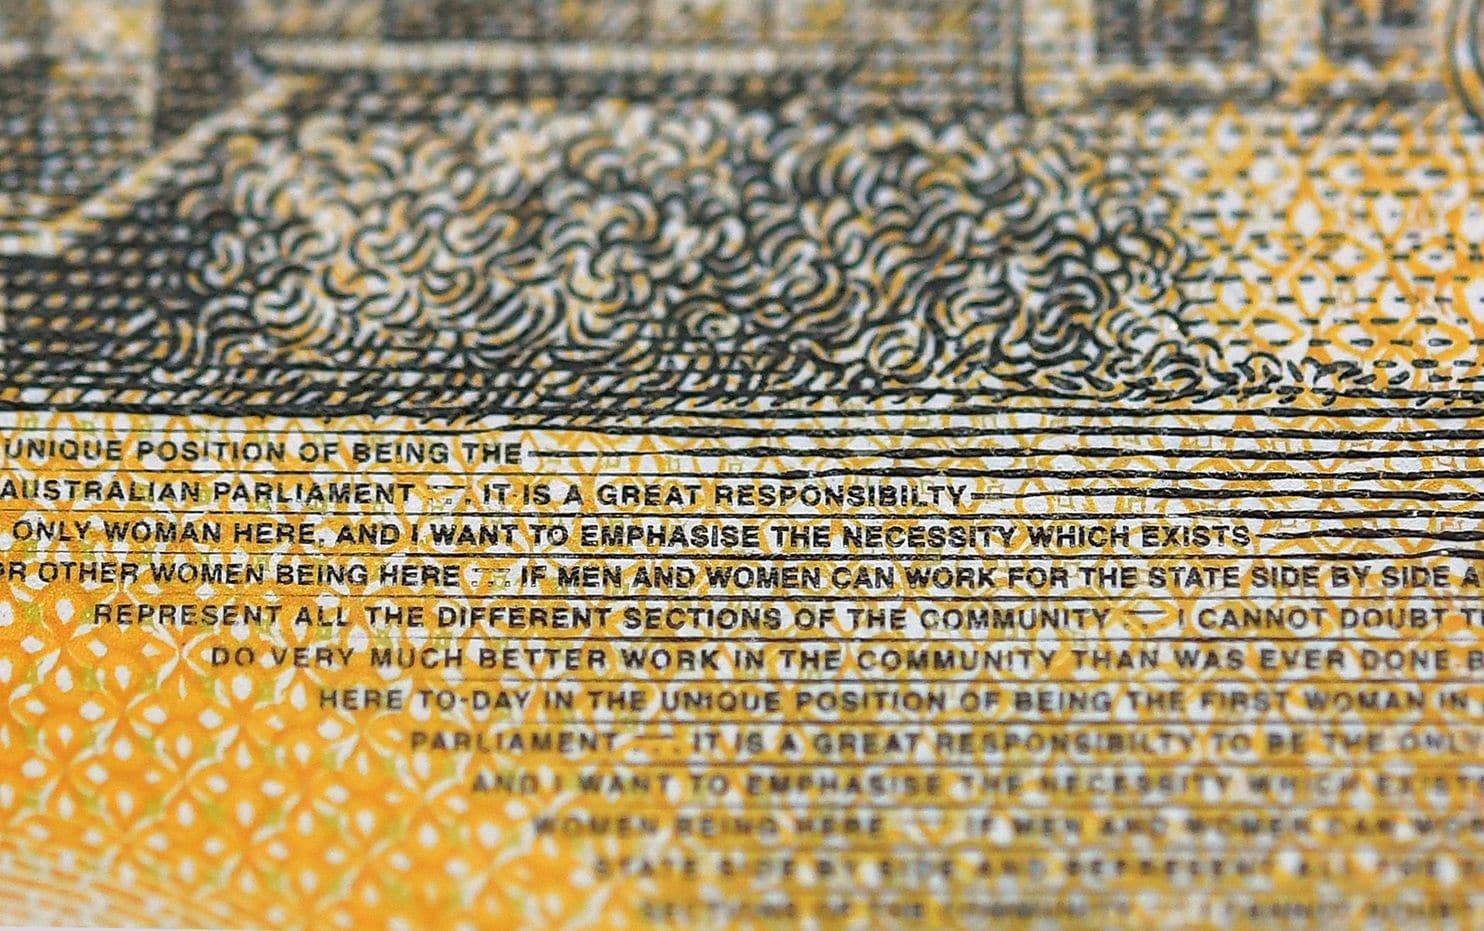 A magnified view of a 50 Australian dollar note containing a typo. (Dylan Coker/EPA-EFE/REX)